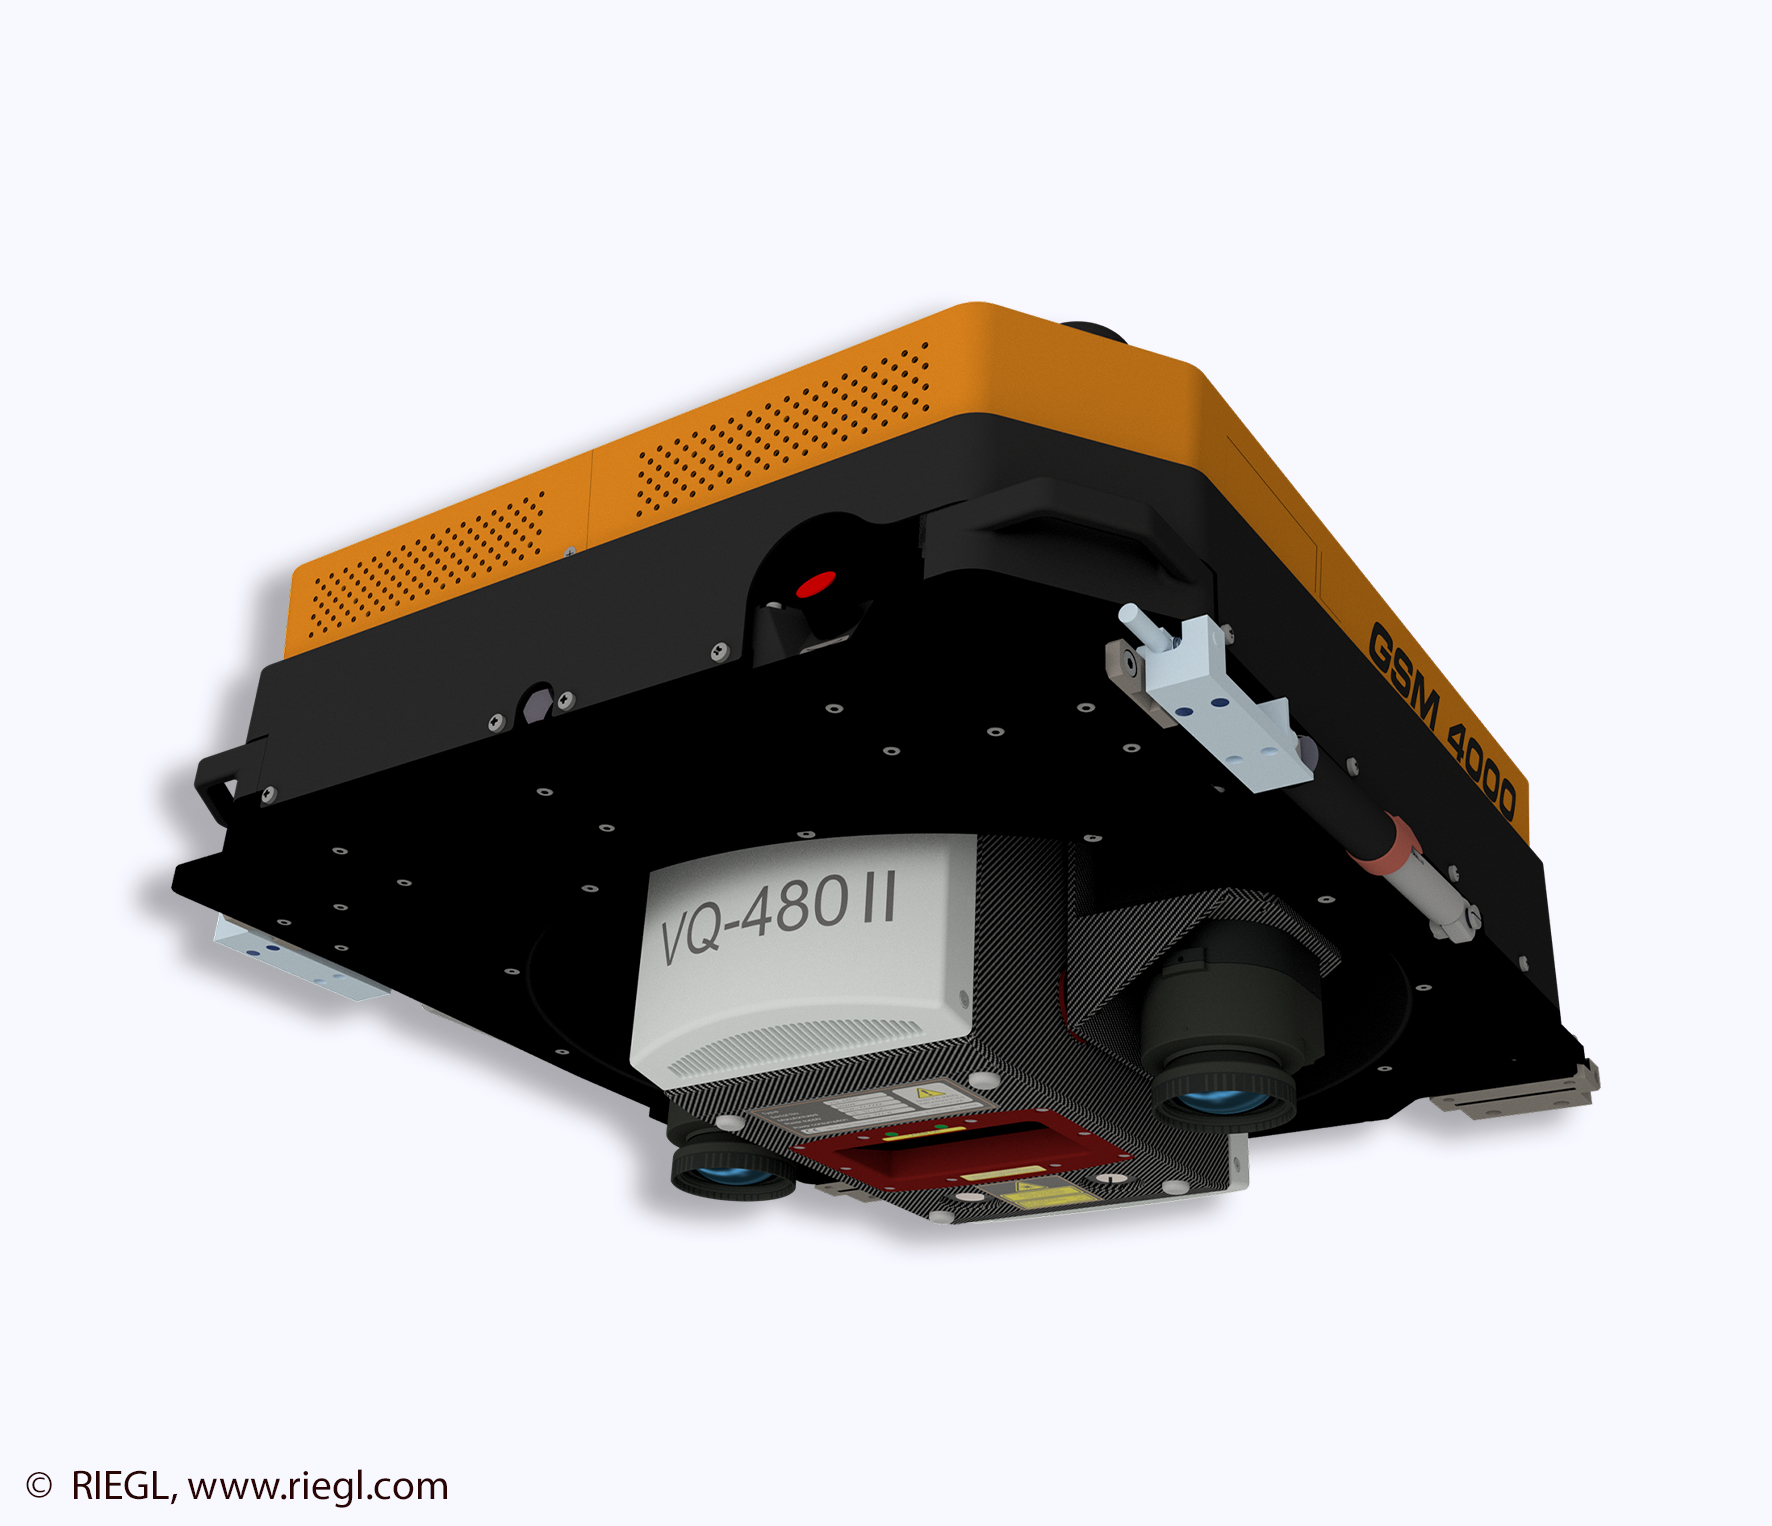 GSM 4000 with Riegl VQ 480 II lidar top view